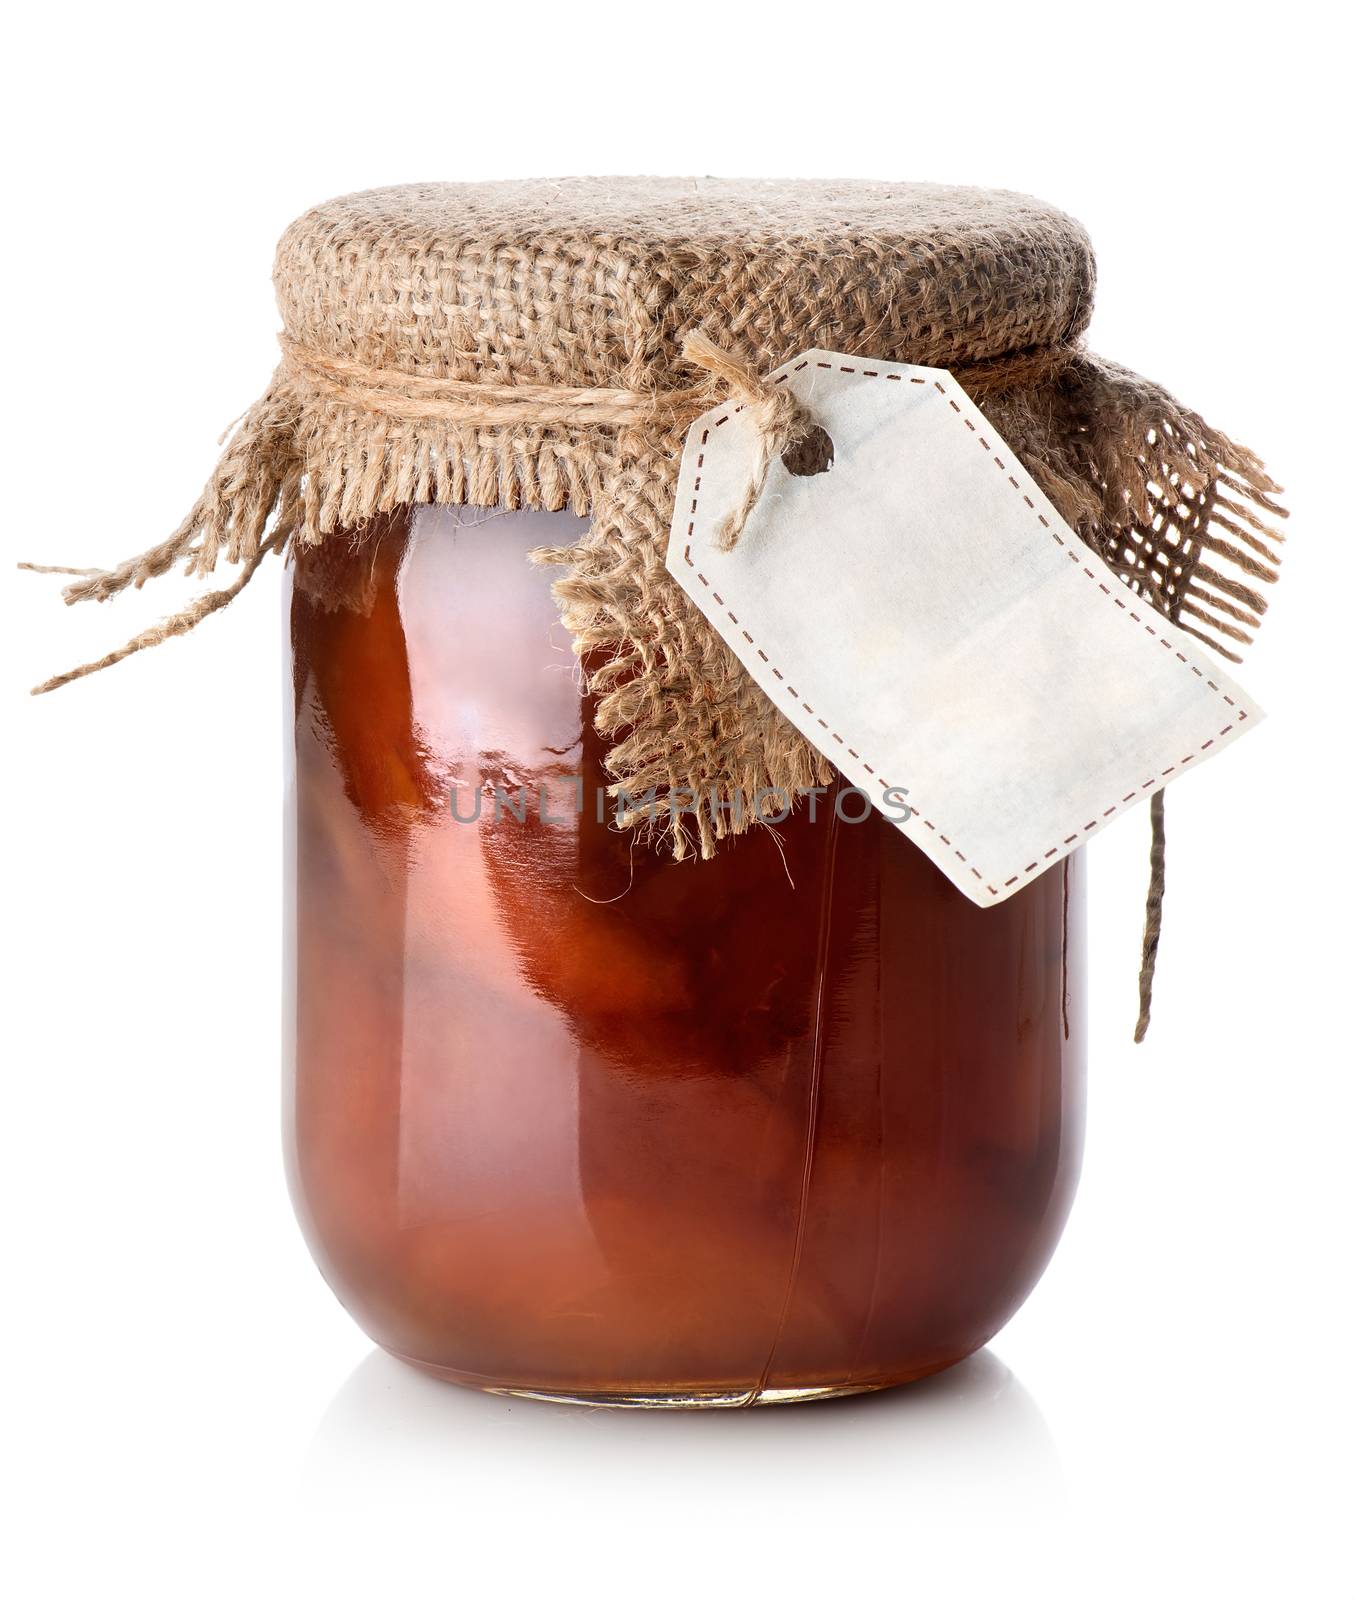 Jar of confiture isolated on a white background